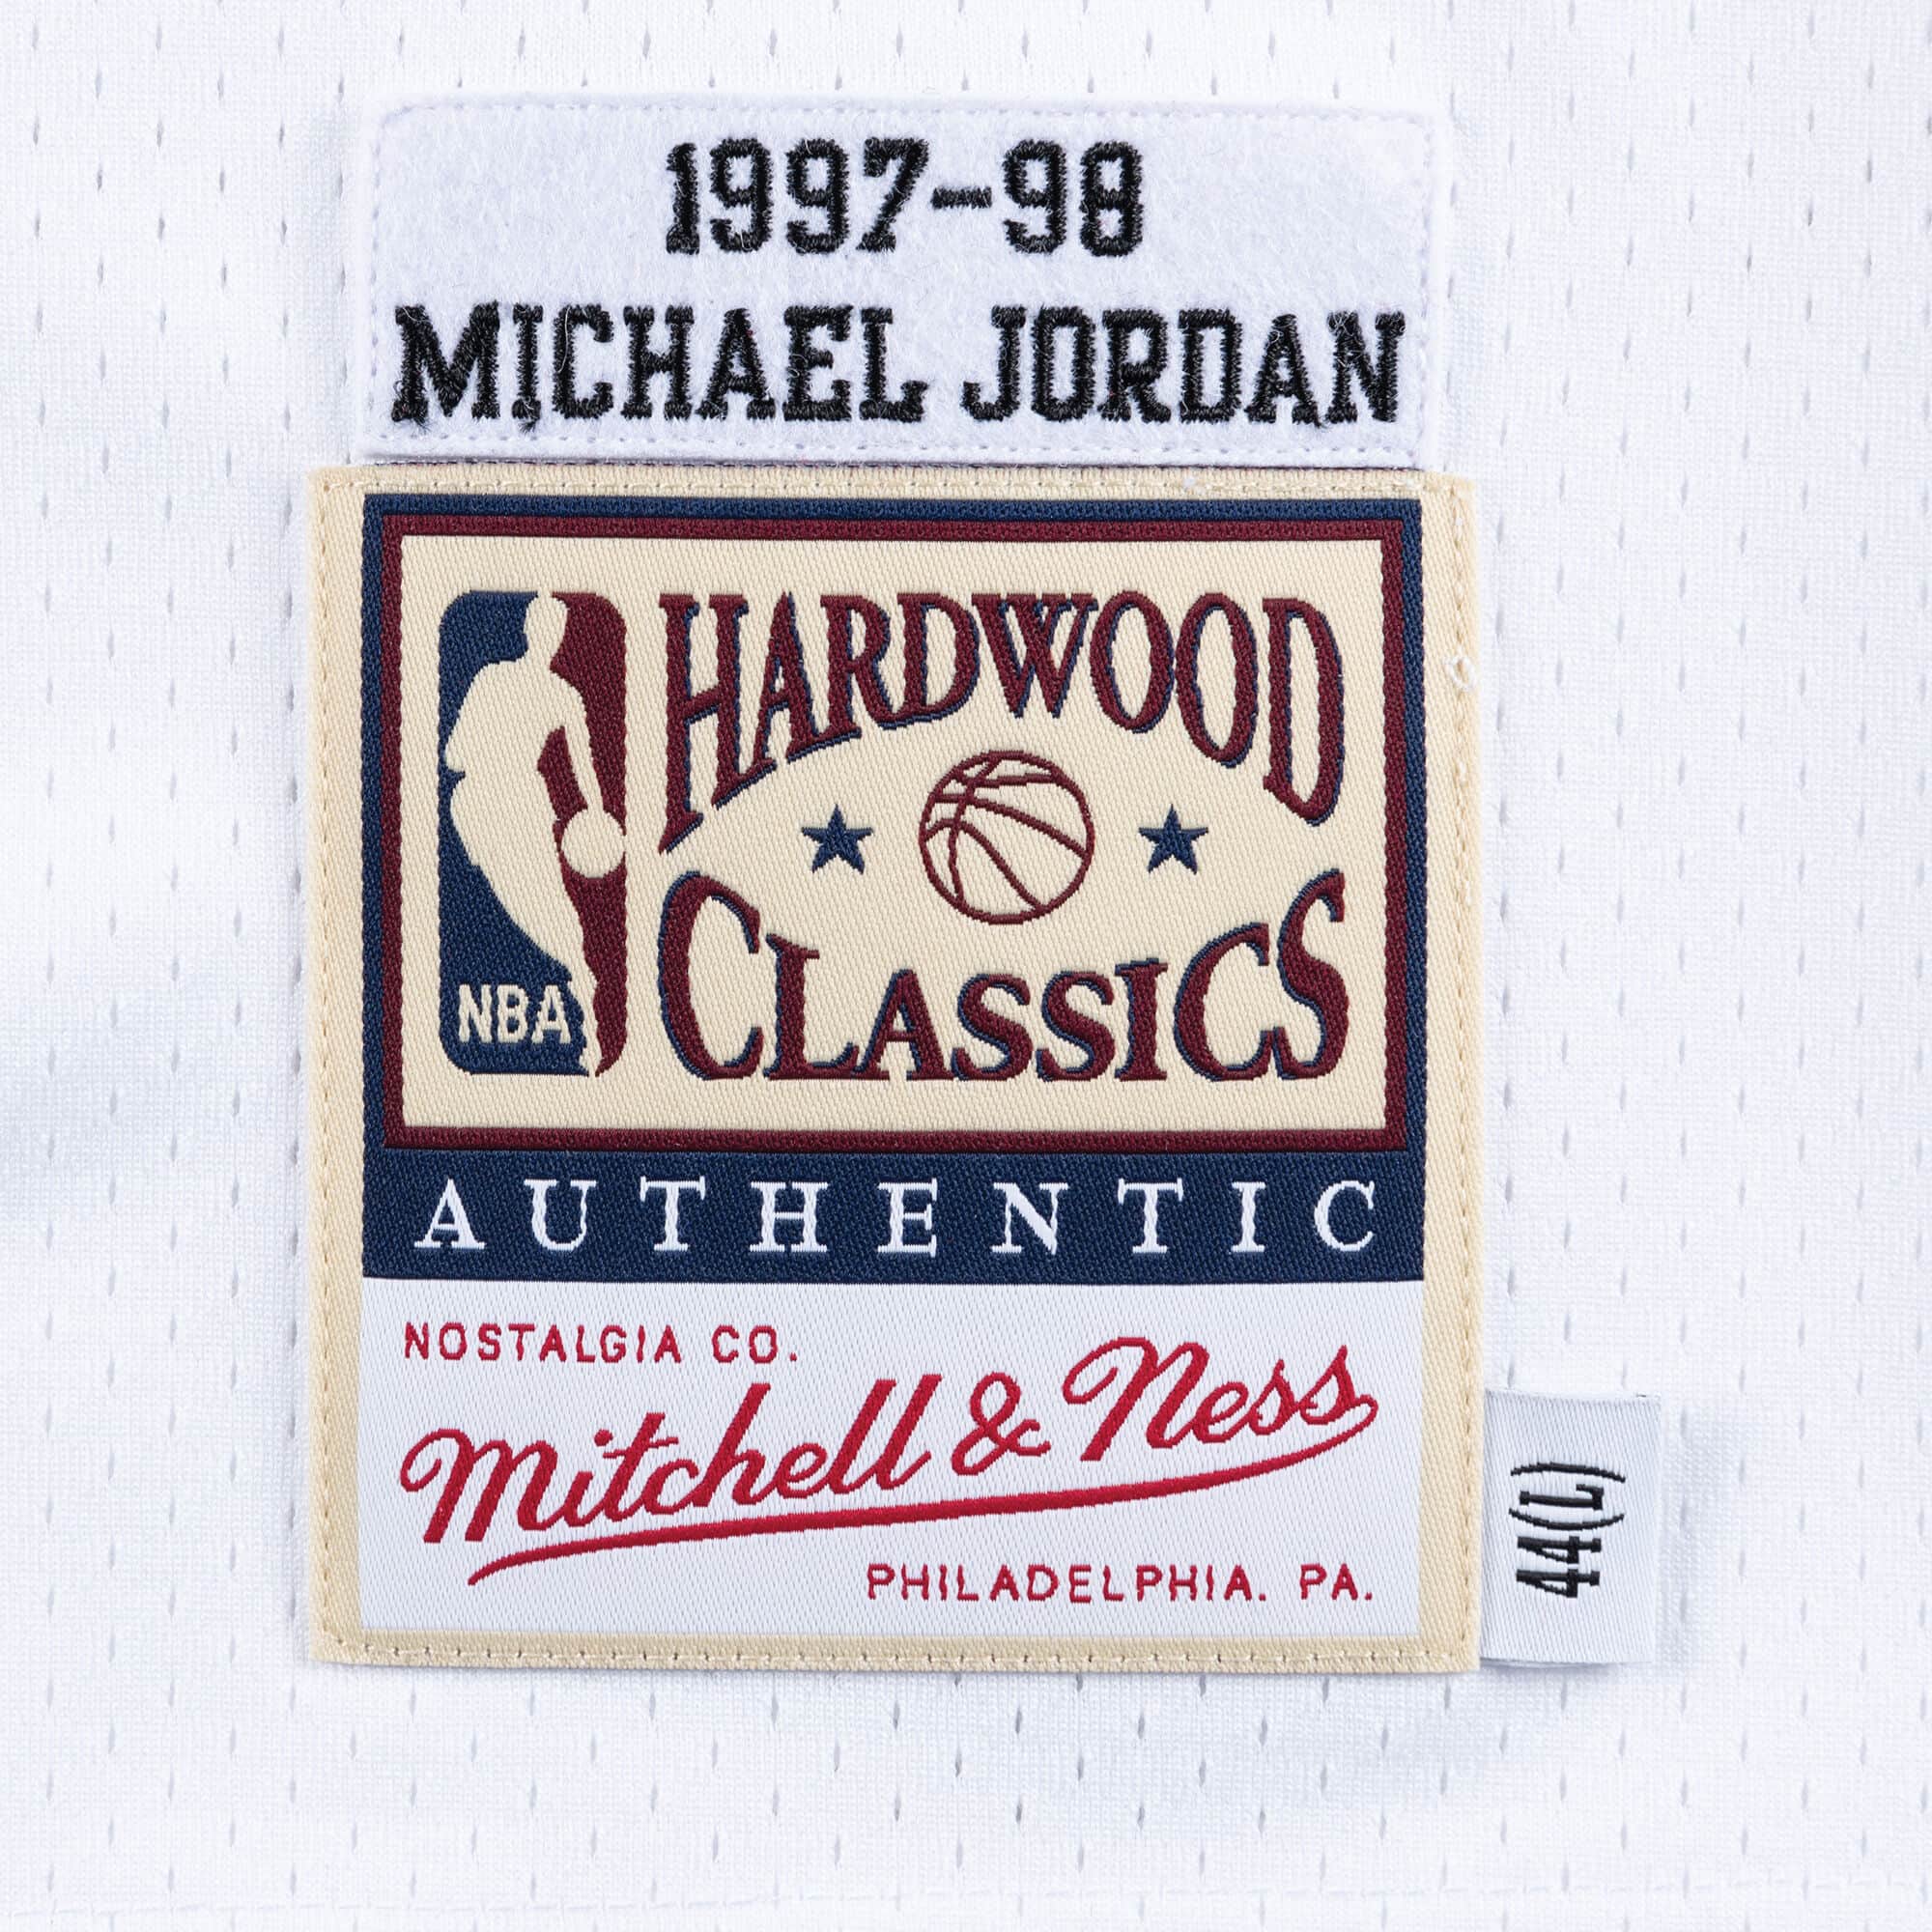 Big & Tall Men's Michael Jordan Chicago Bulls Mitchell and Ness Authentic  Black Throwback Jersey